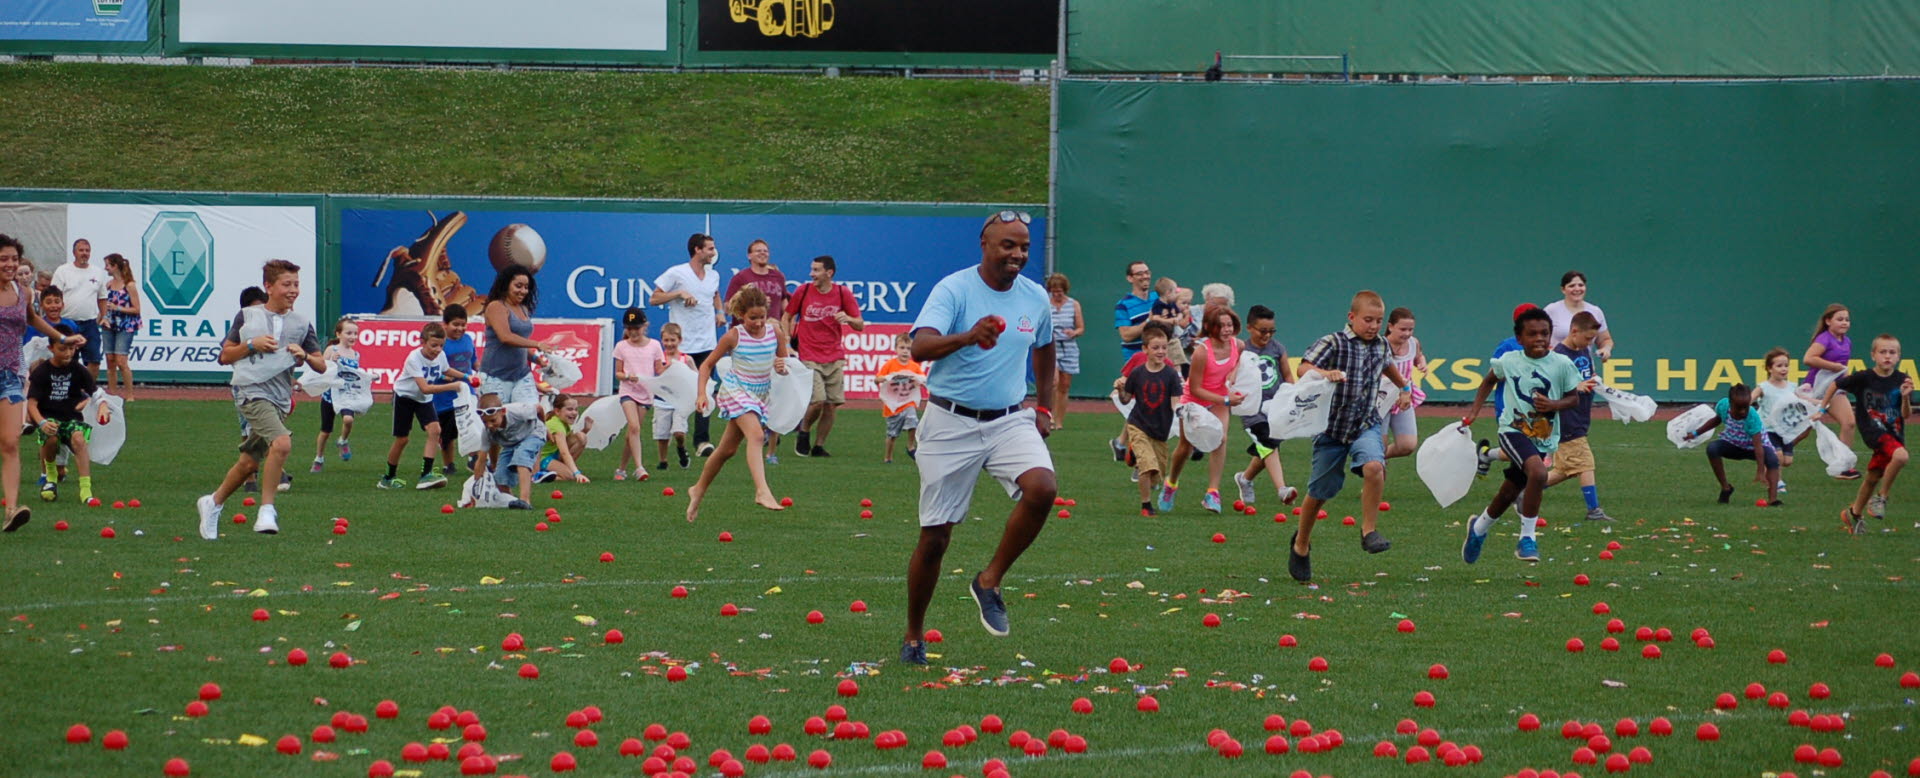 Darryl Gordon at picnic, 2016 with kids for candy drop